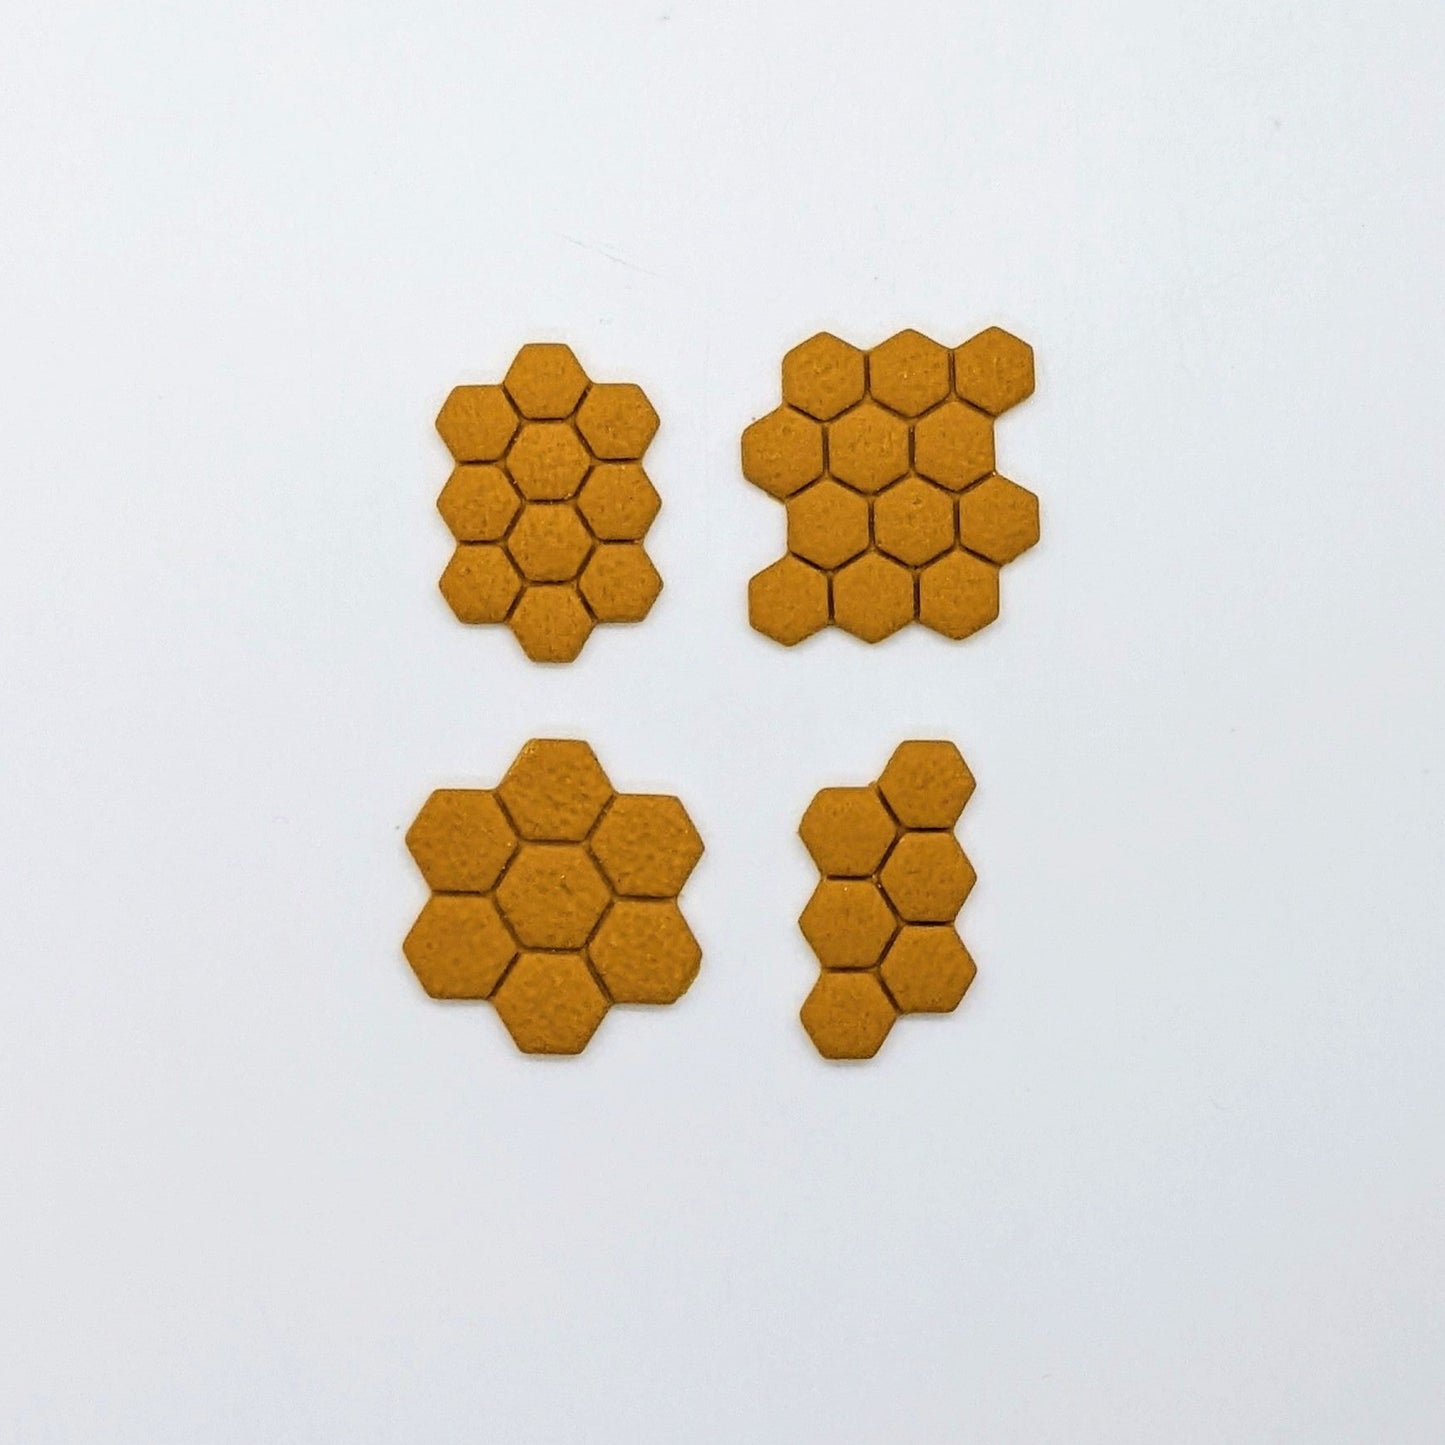 Honey Combs 4 Piece Cookie Cutter Set for Cookies, Ceramics, Pottery, Polymer Clay, Fondant - Multi-Medium Craft & Baking Tools